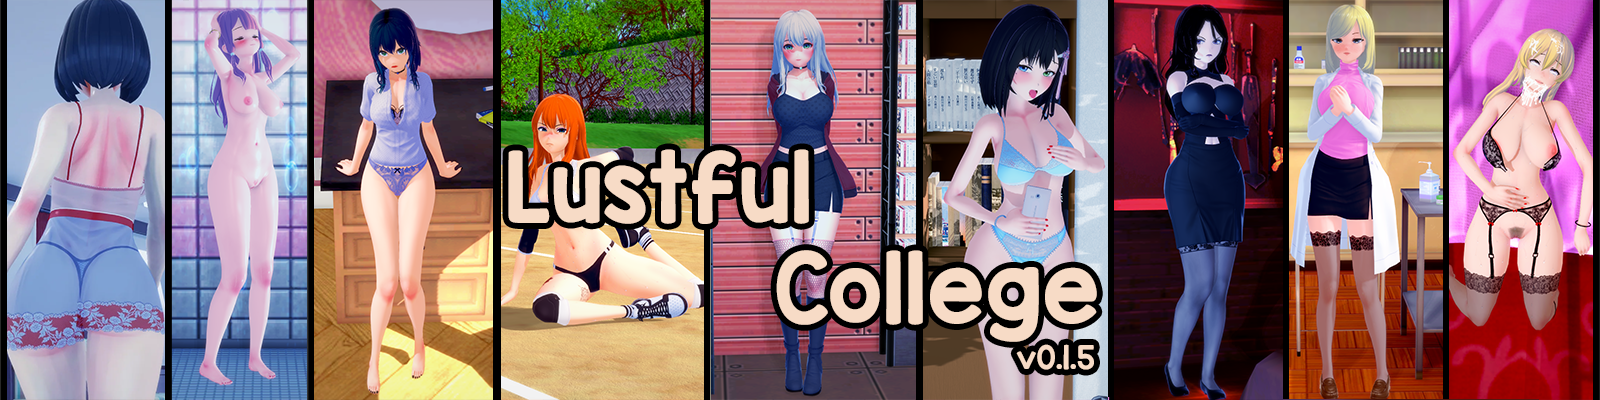 Lustful College1.png